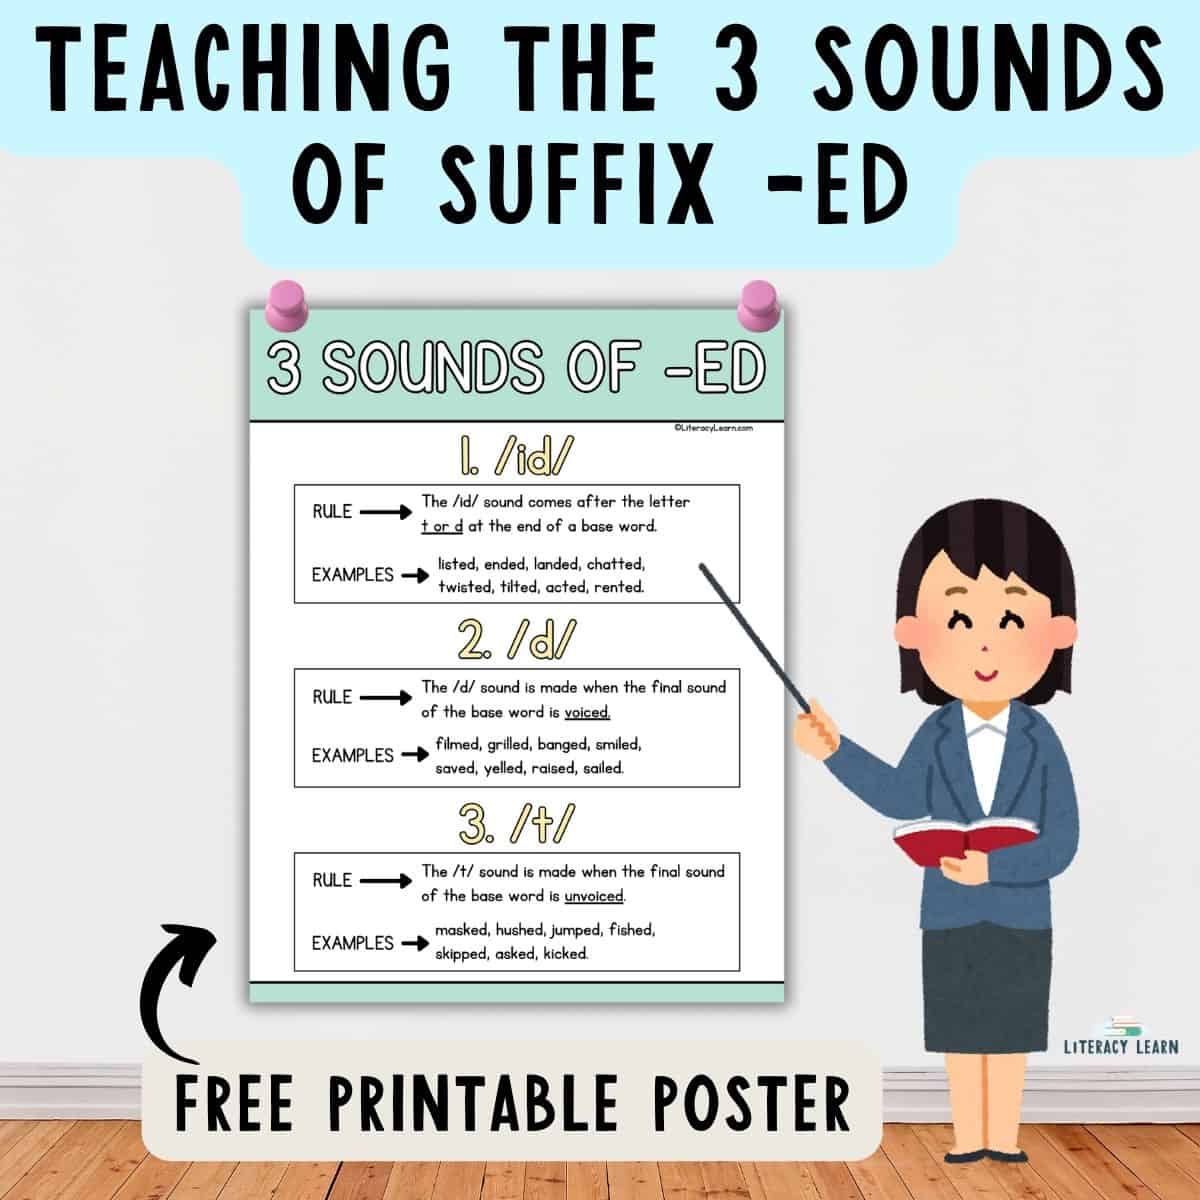 Graphic with a teacher and "3 Sounds of Suffix -ED" poster with rules & examples.